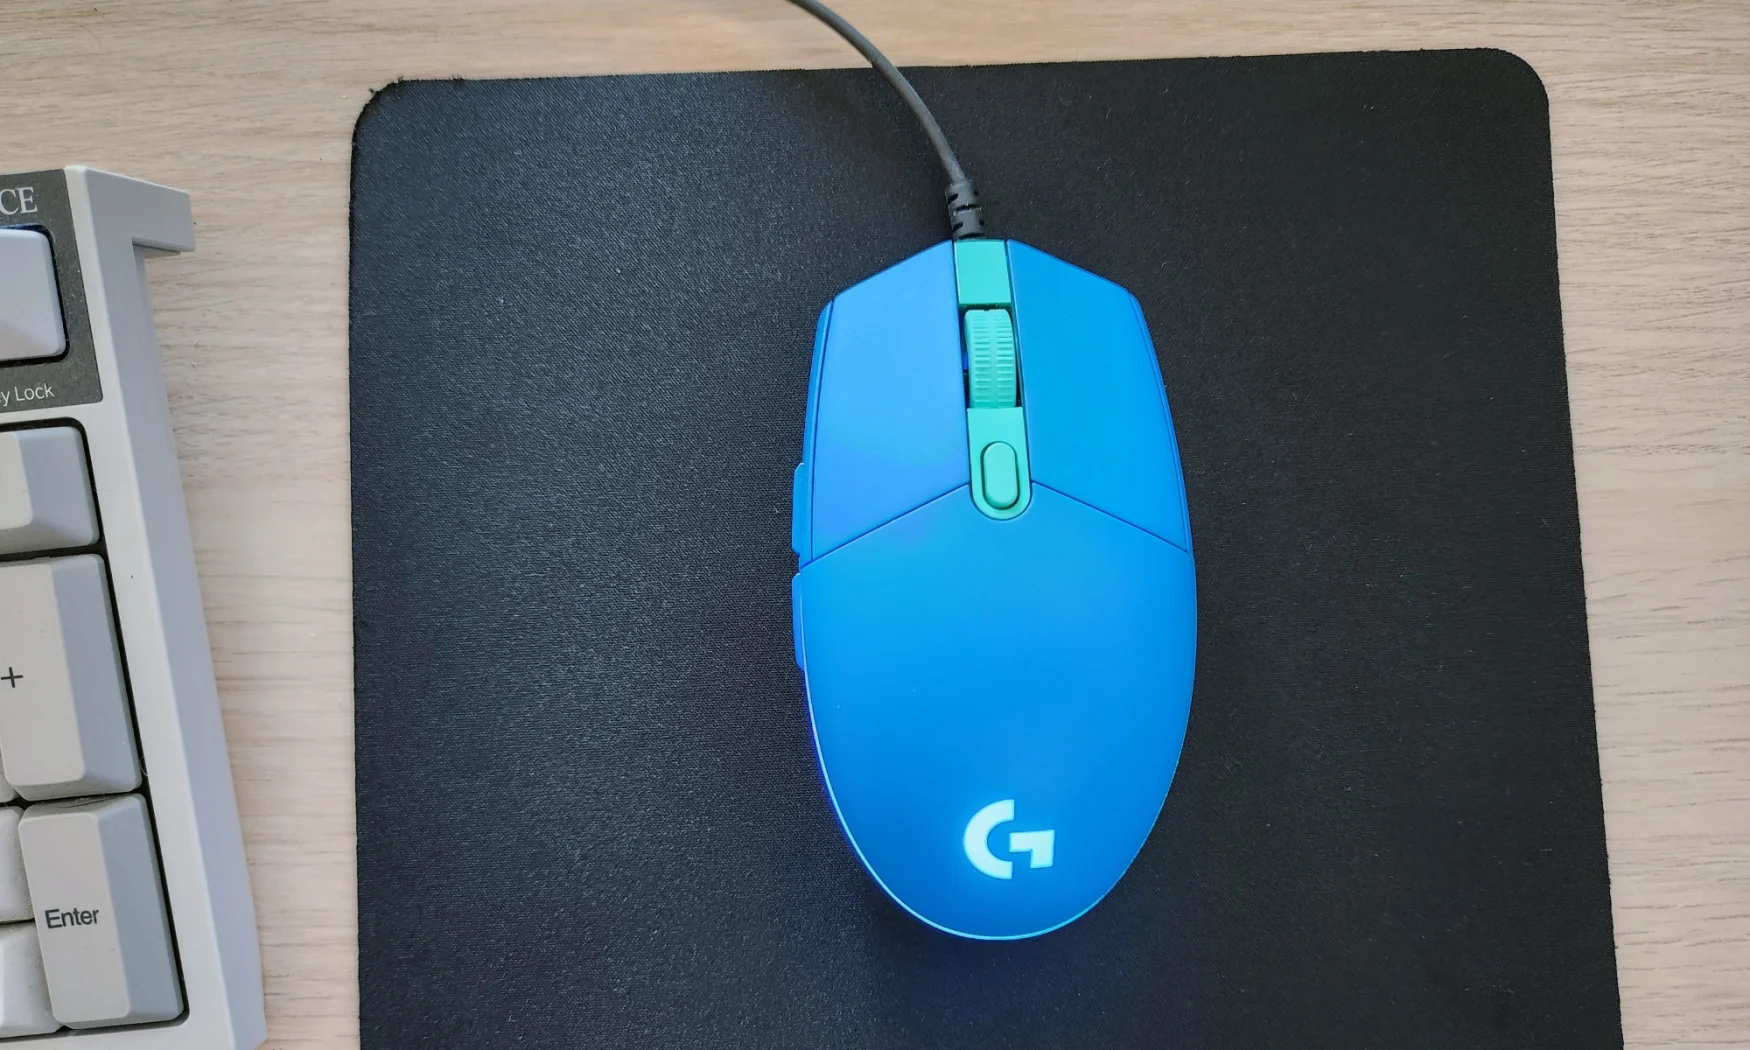 A blue Logitech G203 Lightsync gaming mouse rested on top of a black mouse pad on a desk.